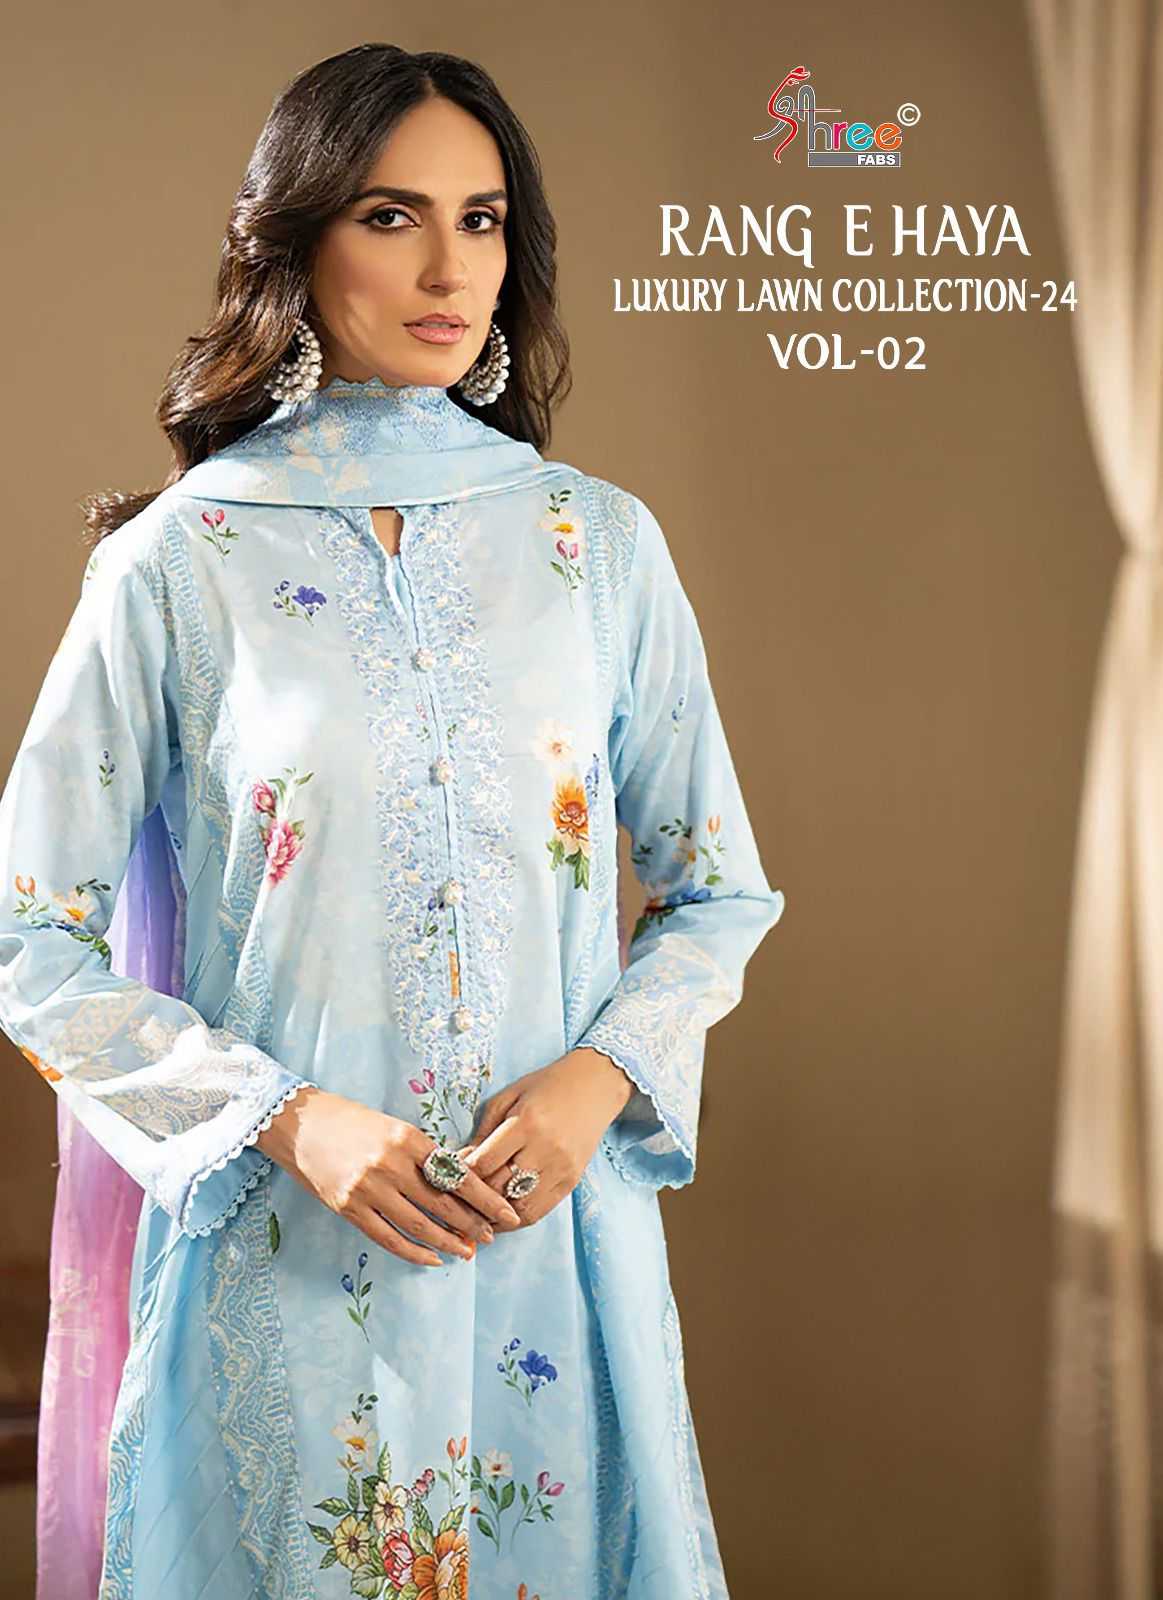 shree fabs rang e haya lux lawn collection vol 2 designer cotton with embroidered Pakistani salwar suit collection 